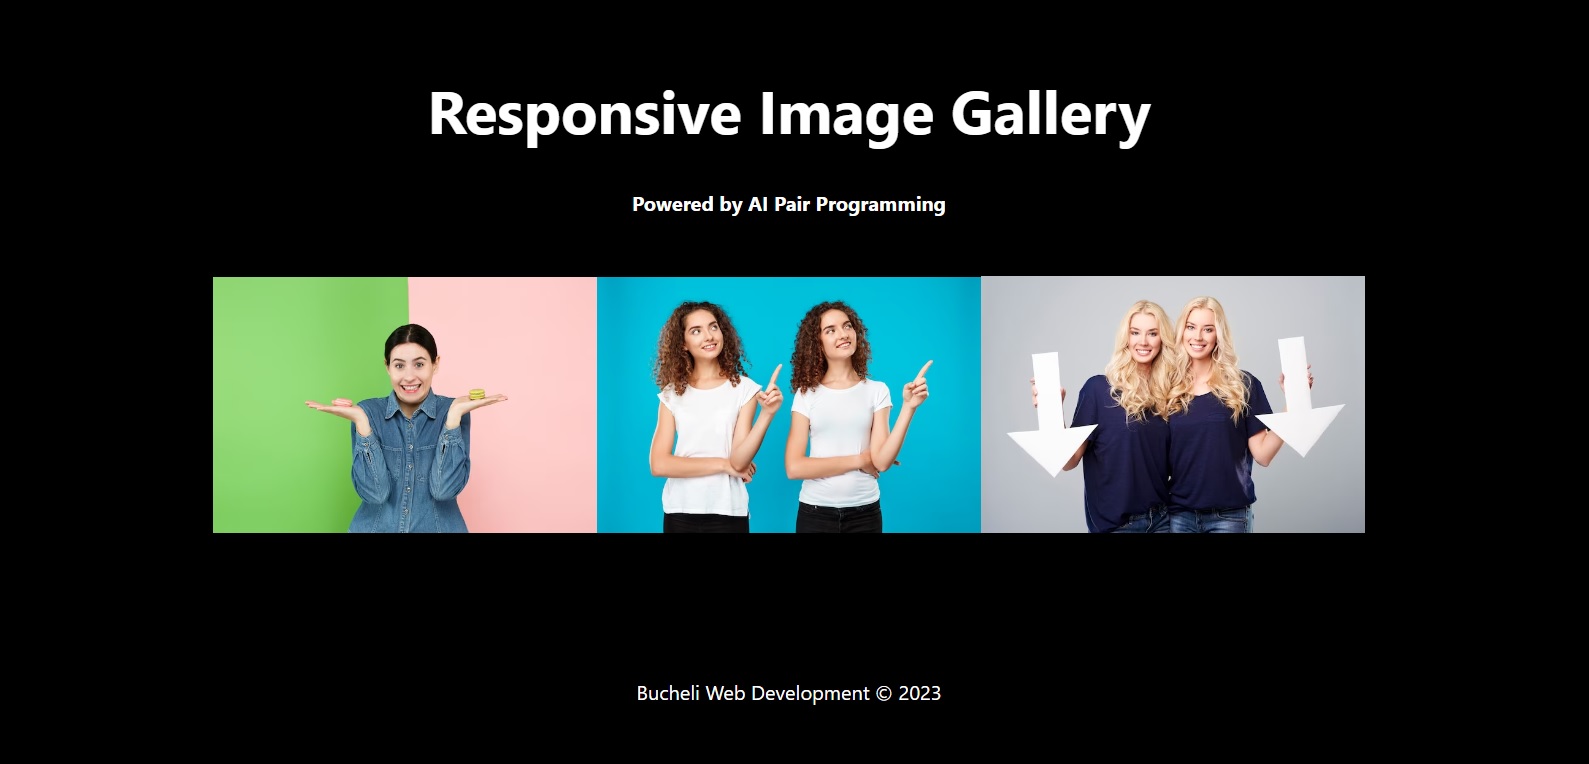 Photo of the responsive image gallery app